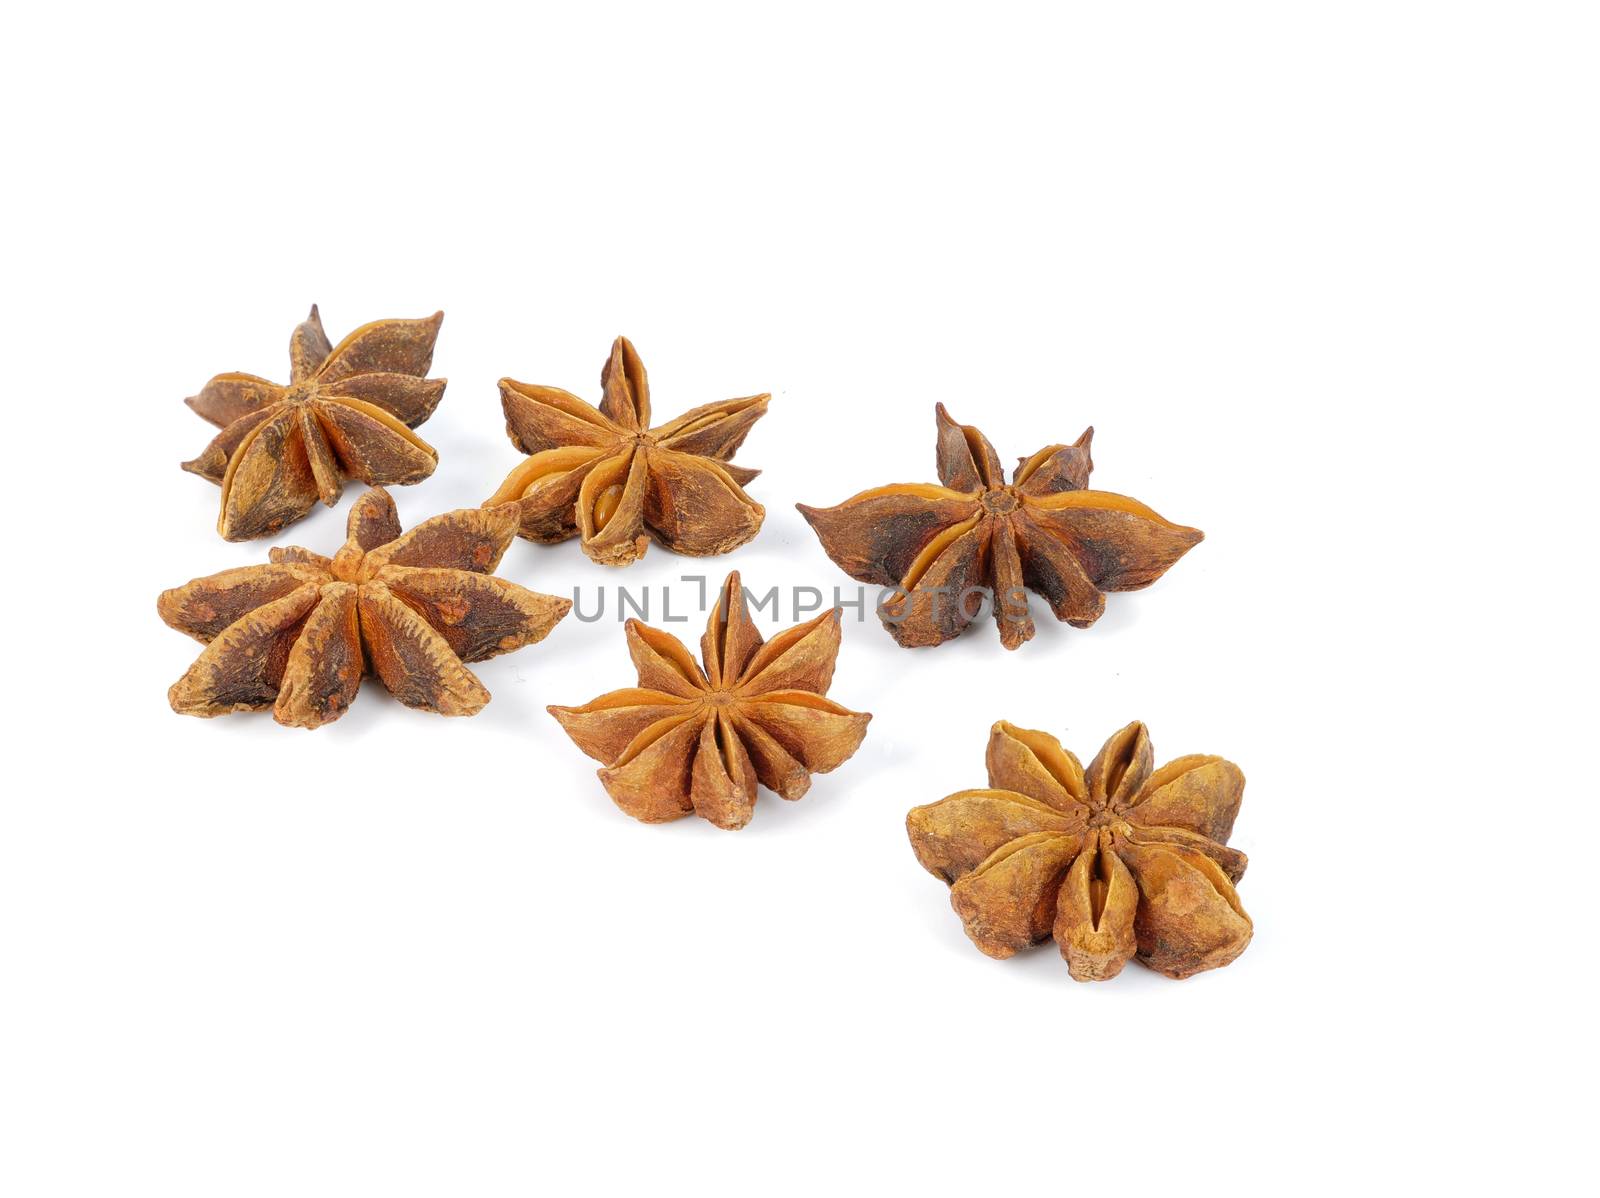 six brown star anises, isolated on white background